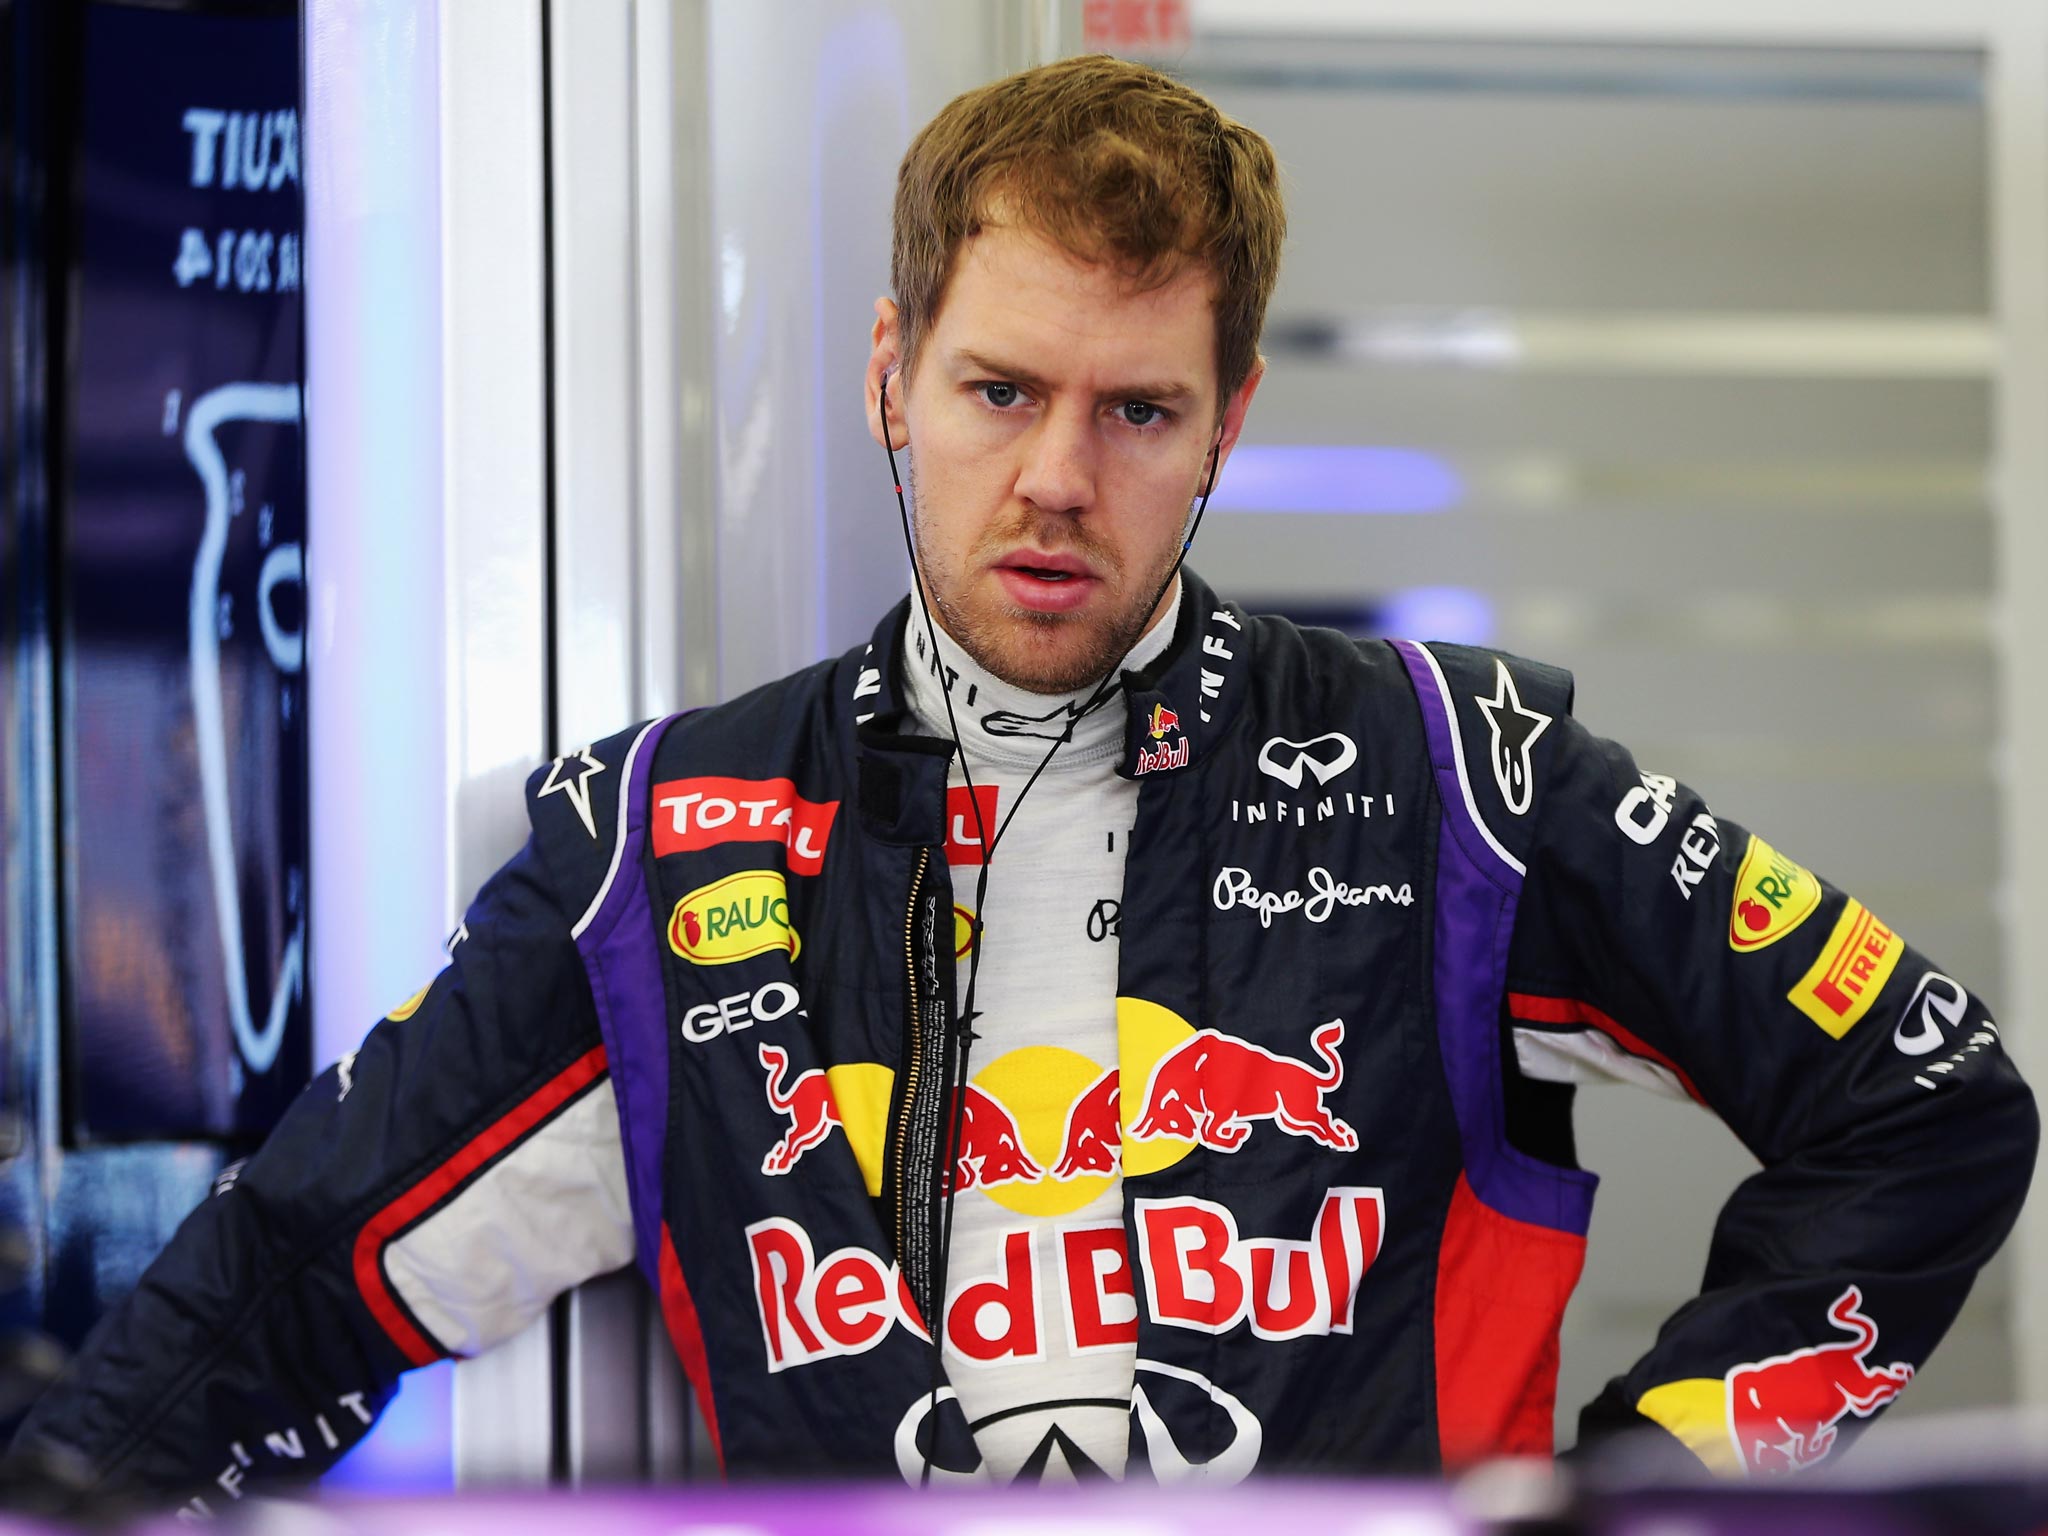 Sebastian Vettel has admitted Red Bull are having a 'bloody difficult time' adapting to their new RB10